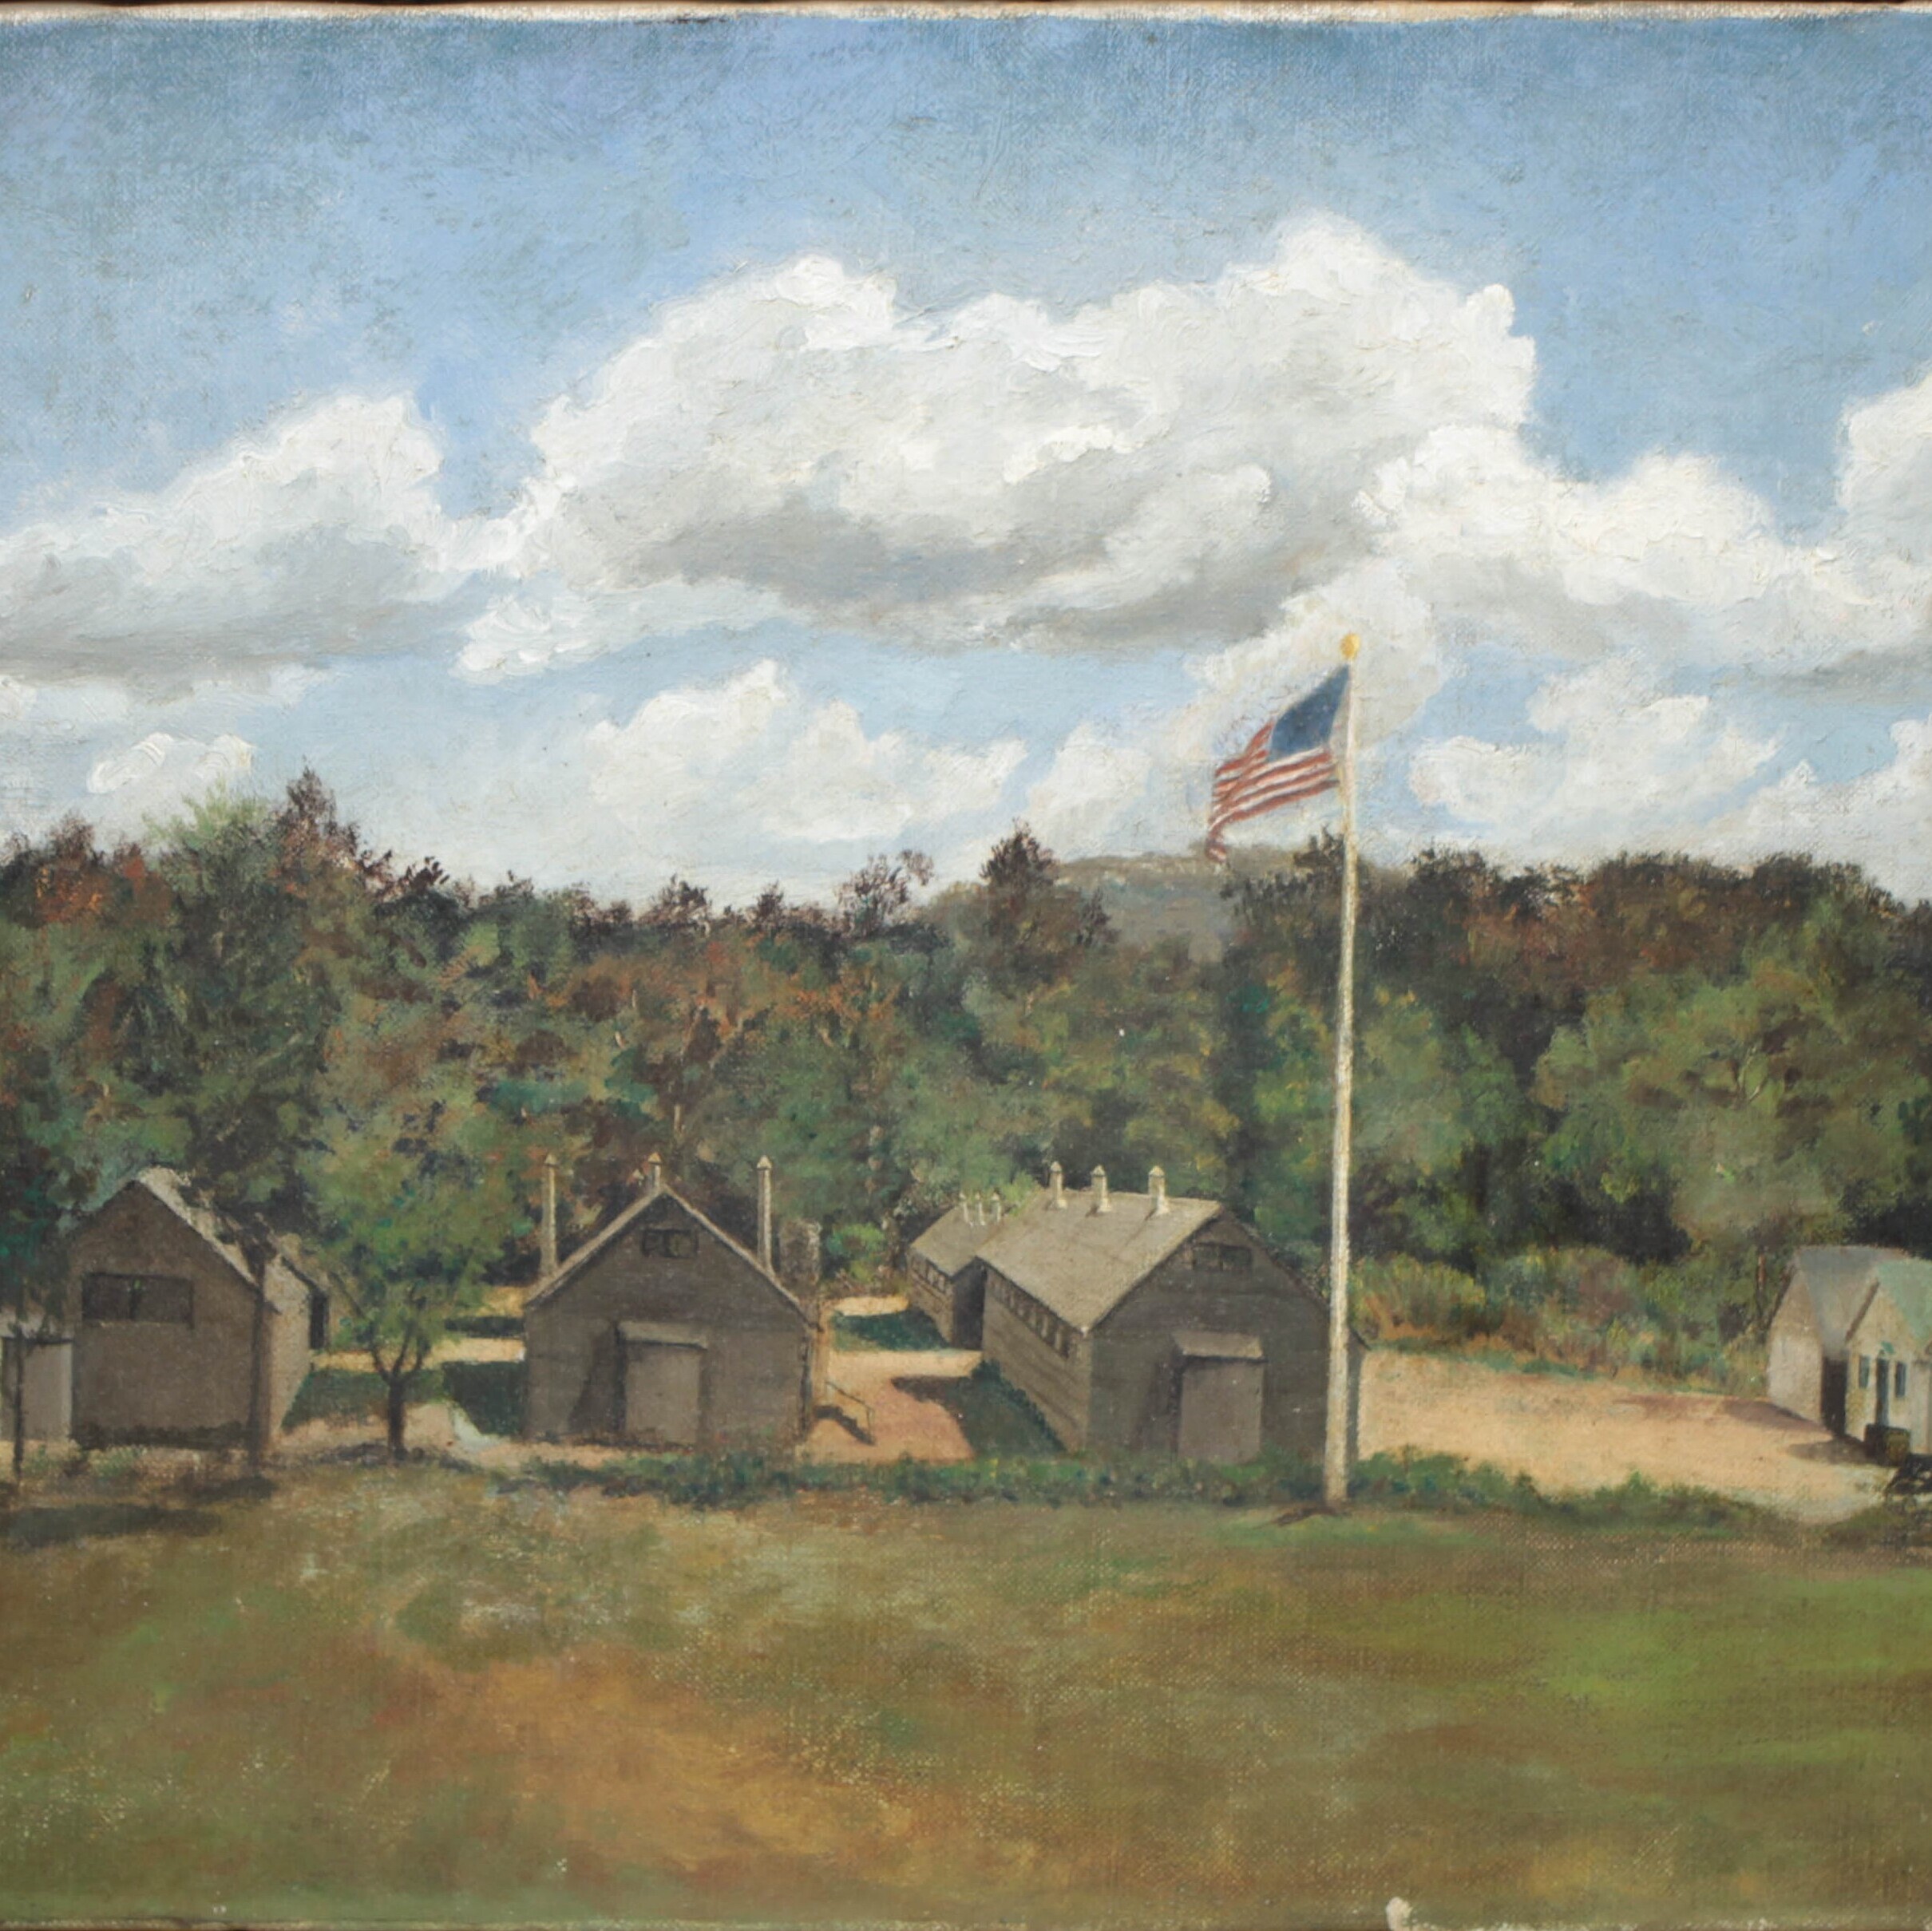 painting featuring buildings, trees, and american flag